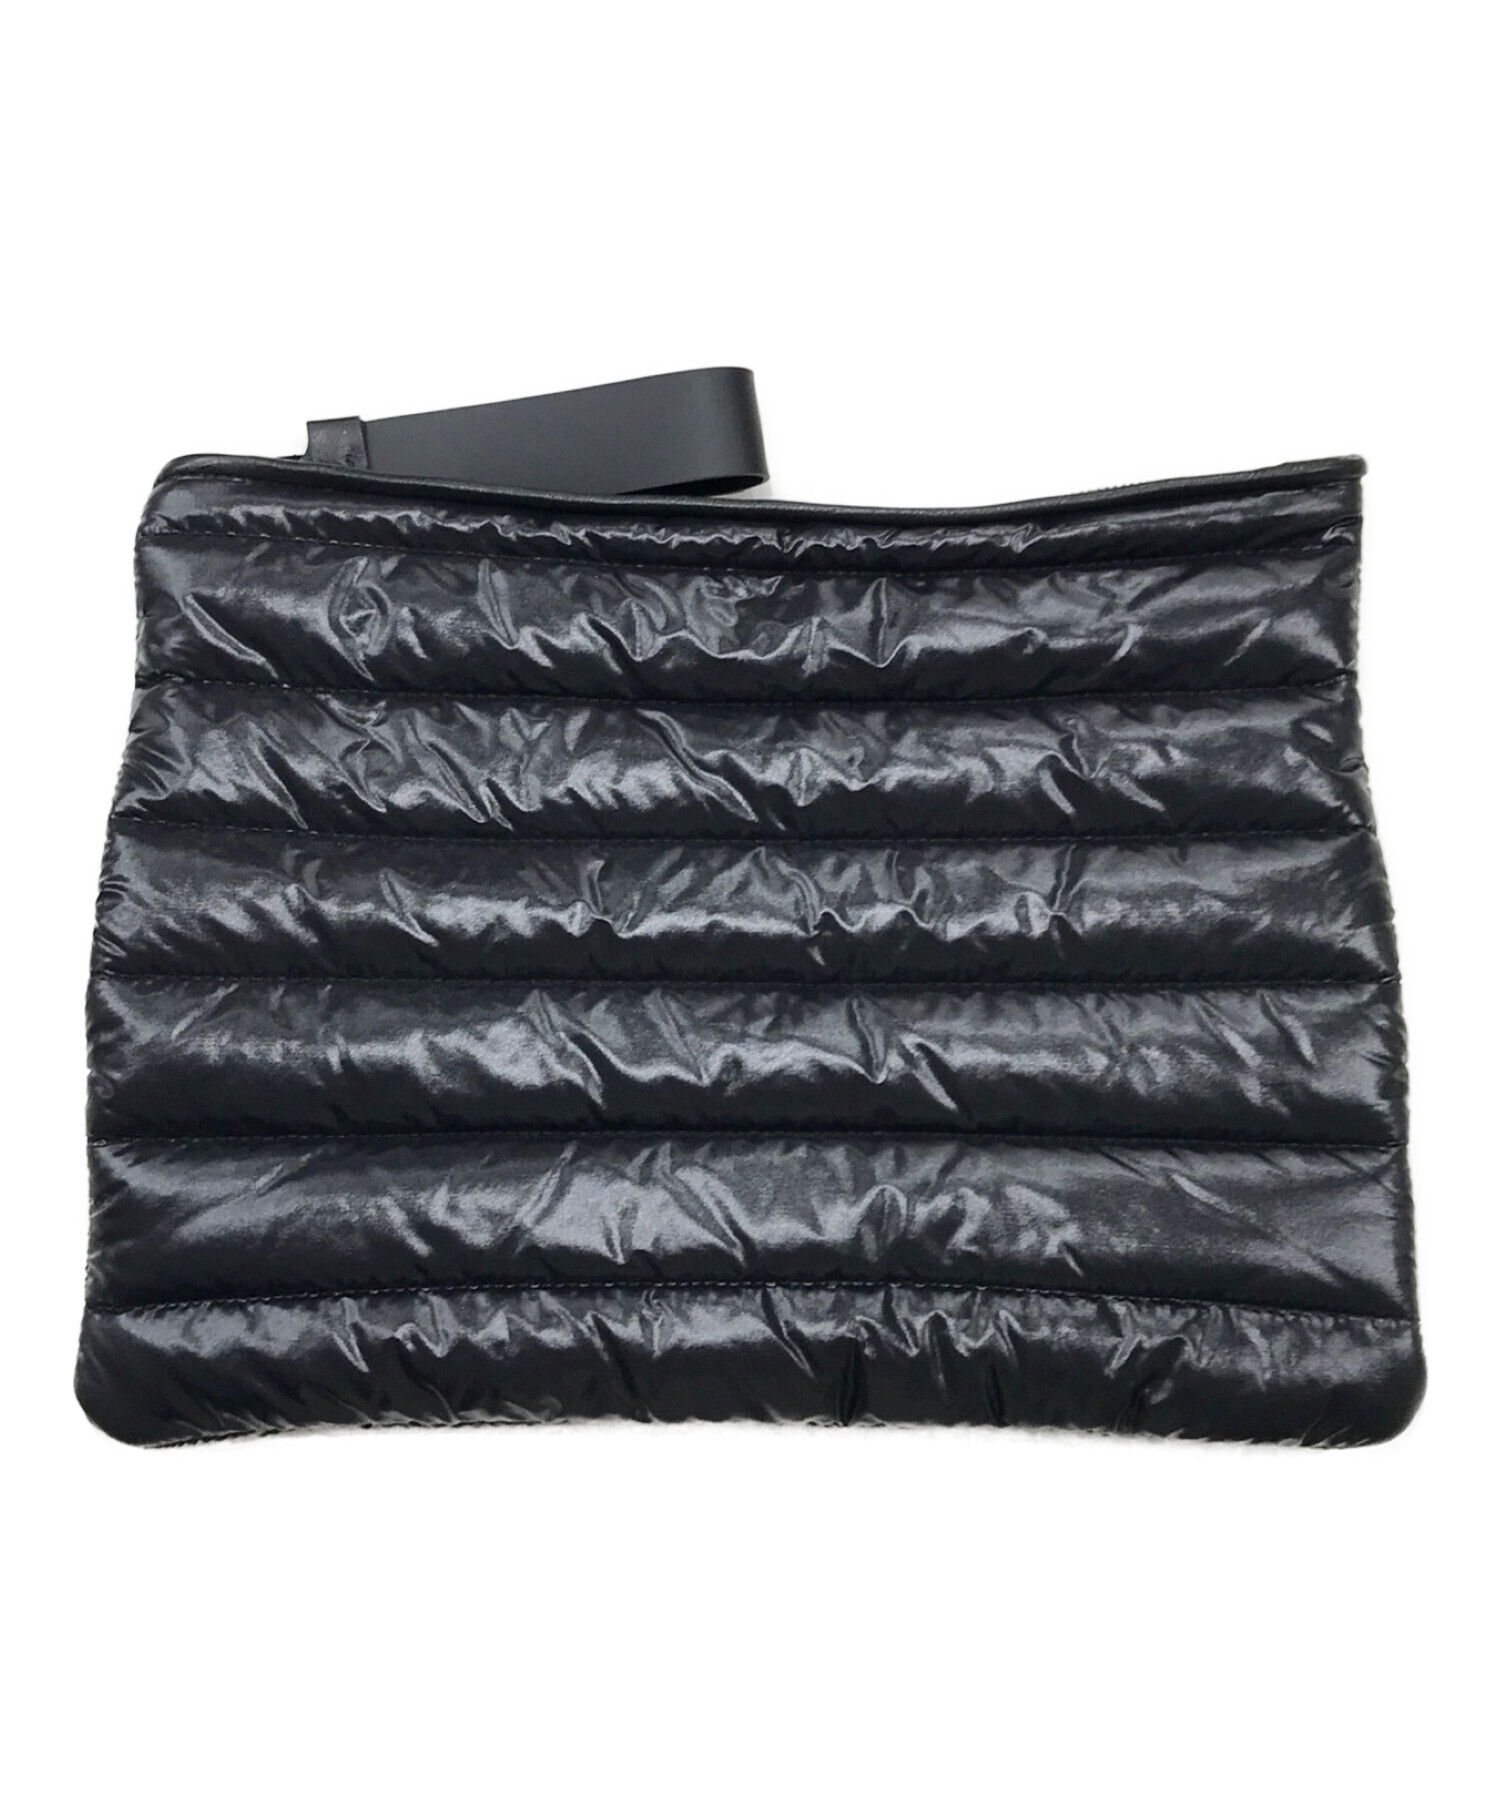 MONCLER モンクレール POUCH GM レザー クラッチバッグ